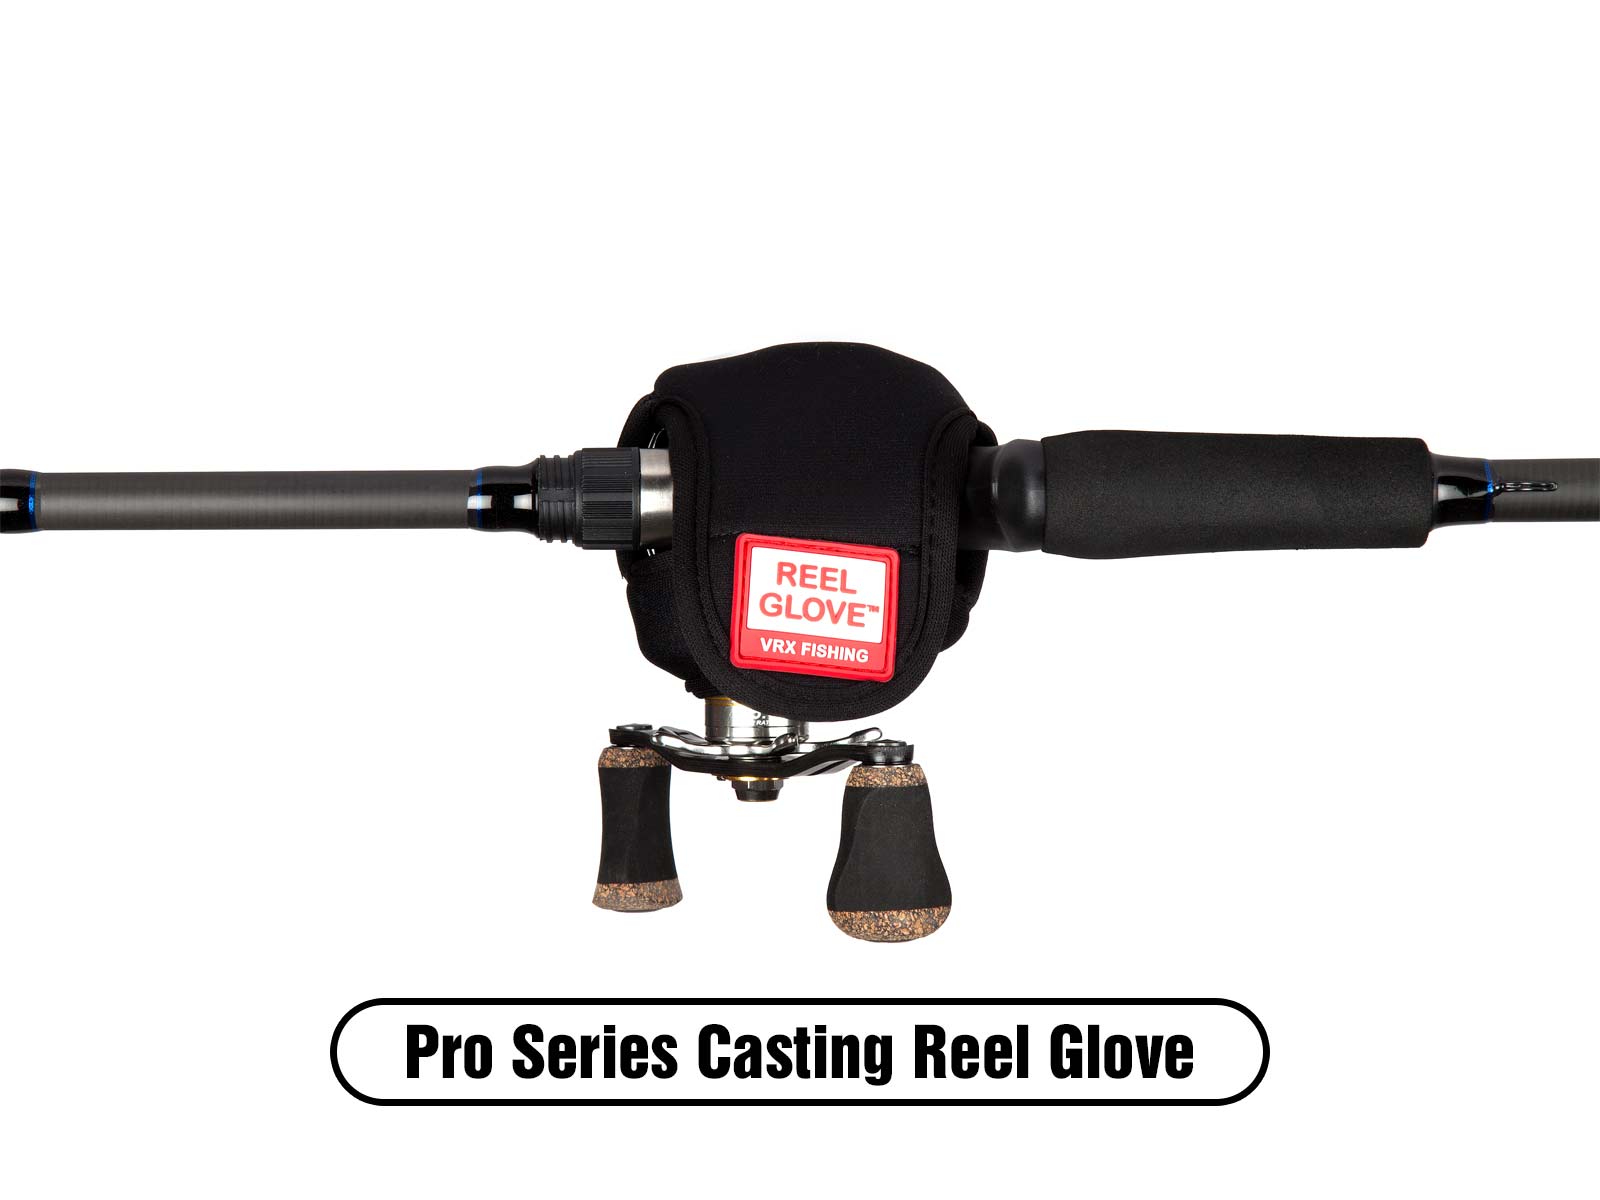 The Reel Glove - Casting – The Rod Glove